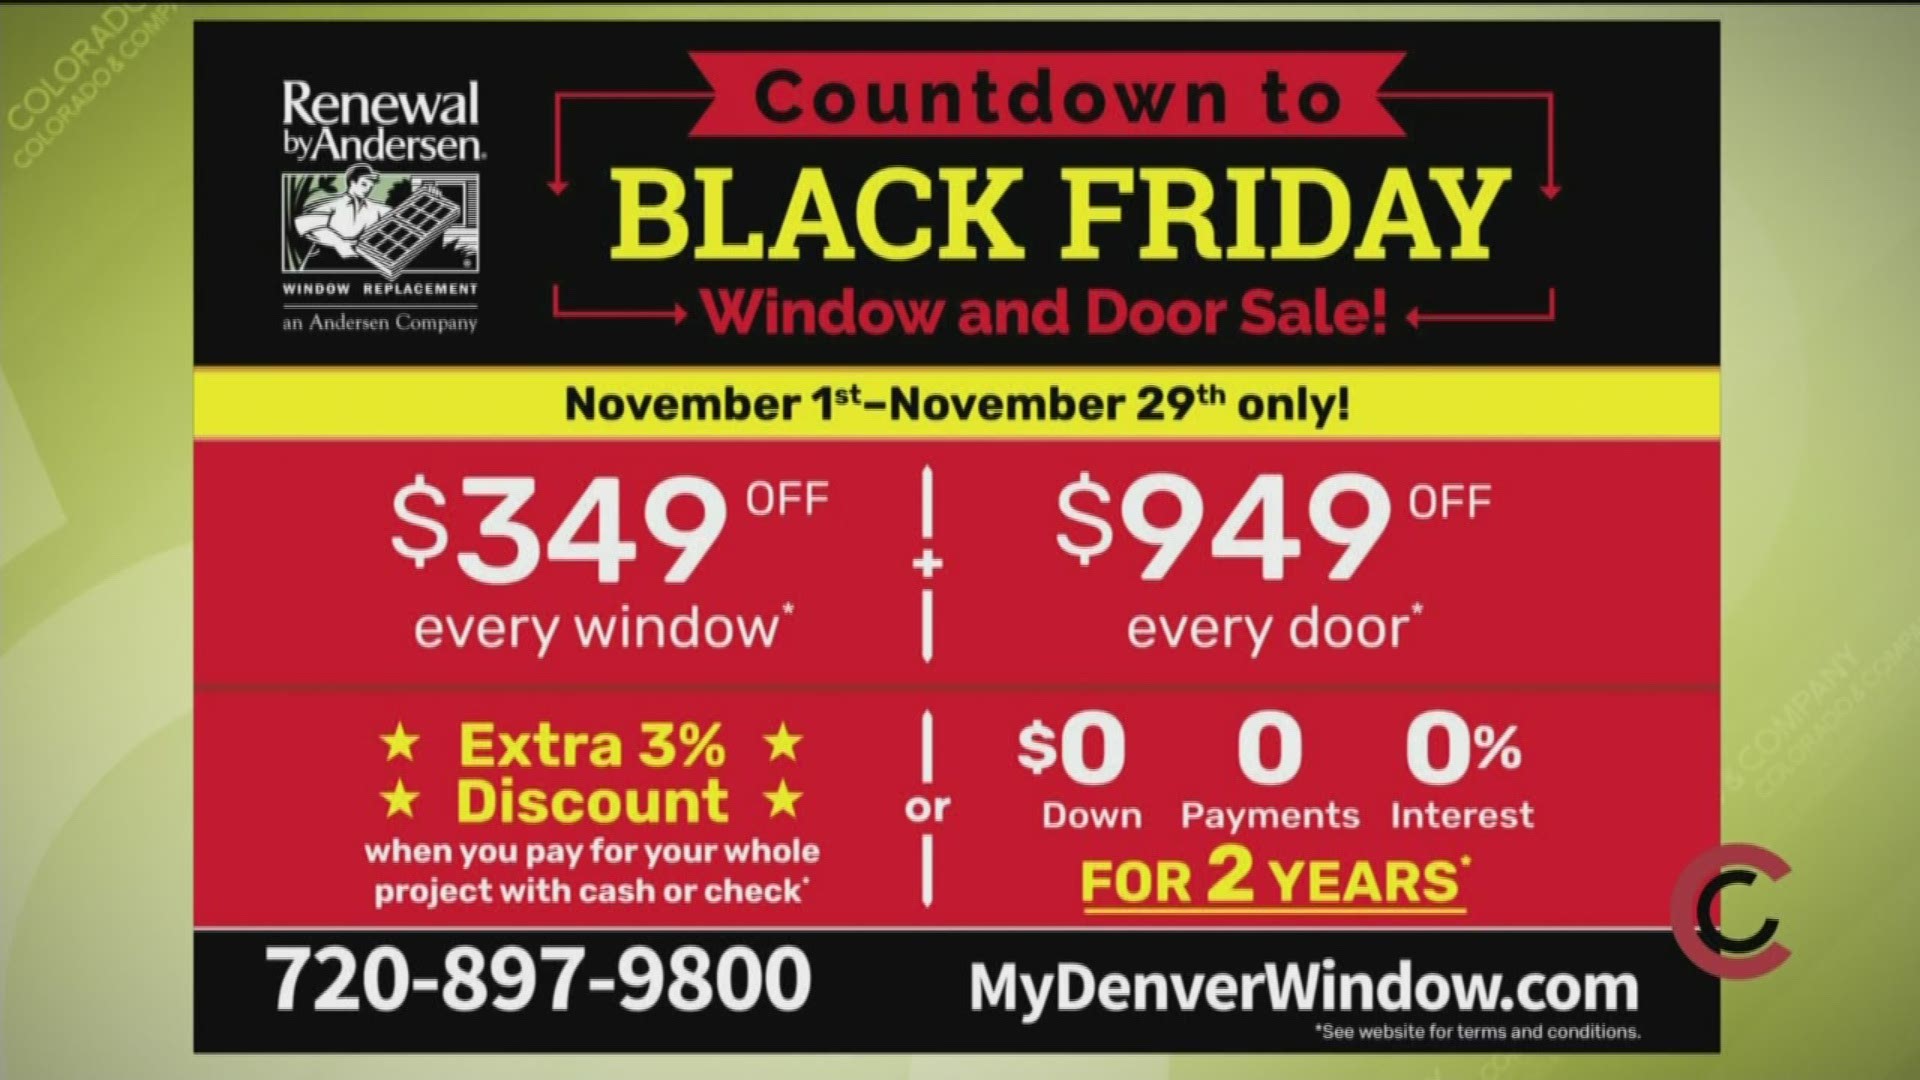 The Countdown to Black Friday Sale is Renewal by Andersen's biggest savings and financing offer of the year. Learn what you can save online at www.MyDenverWindow.com